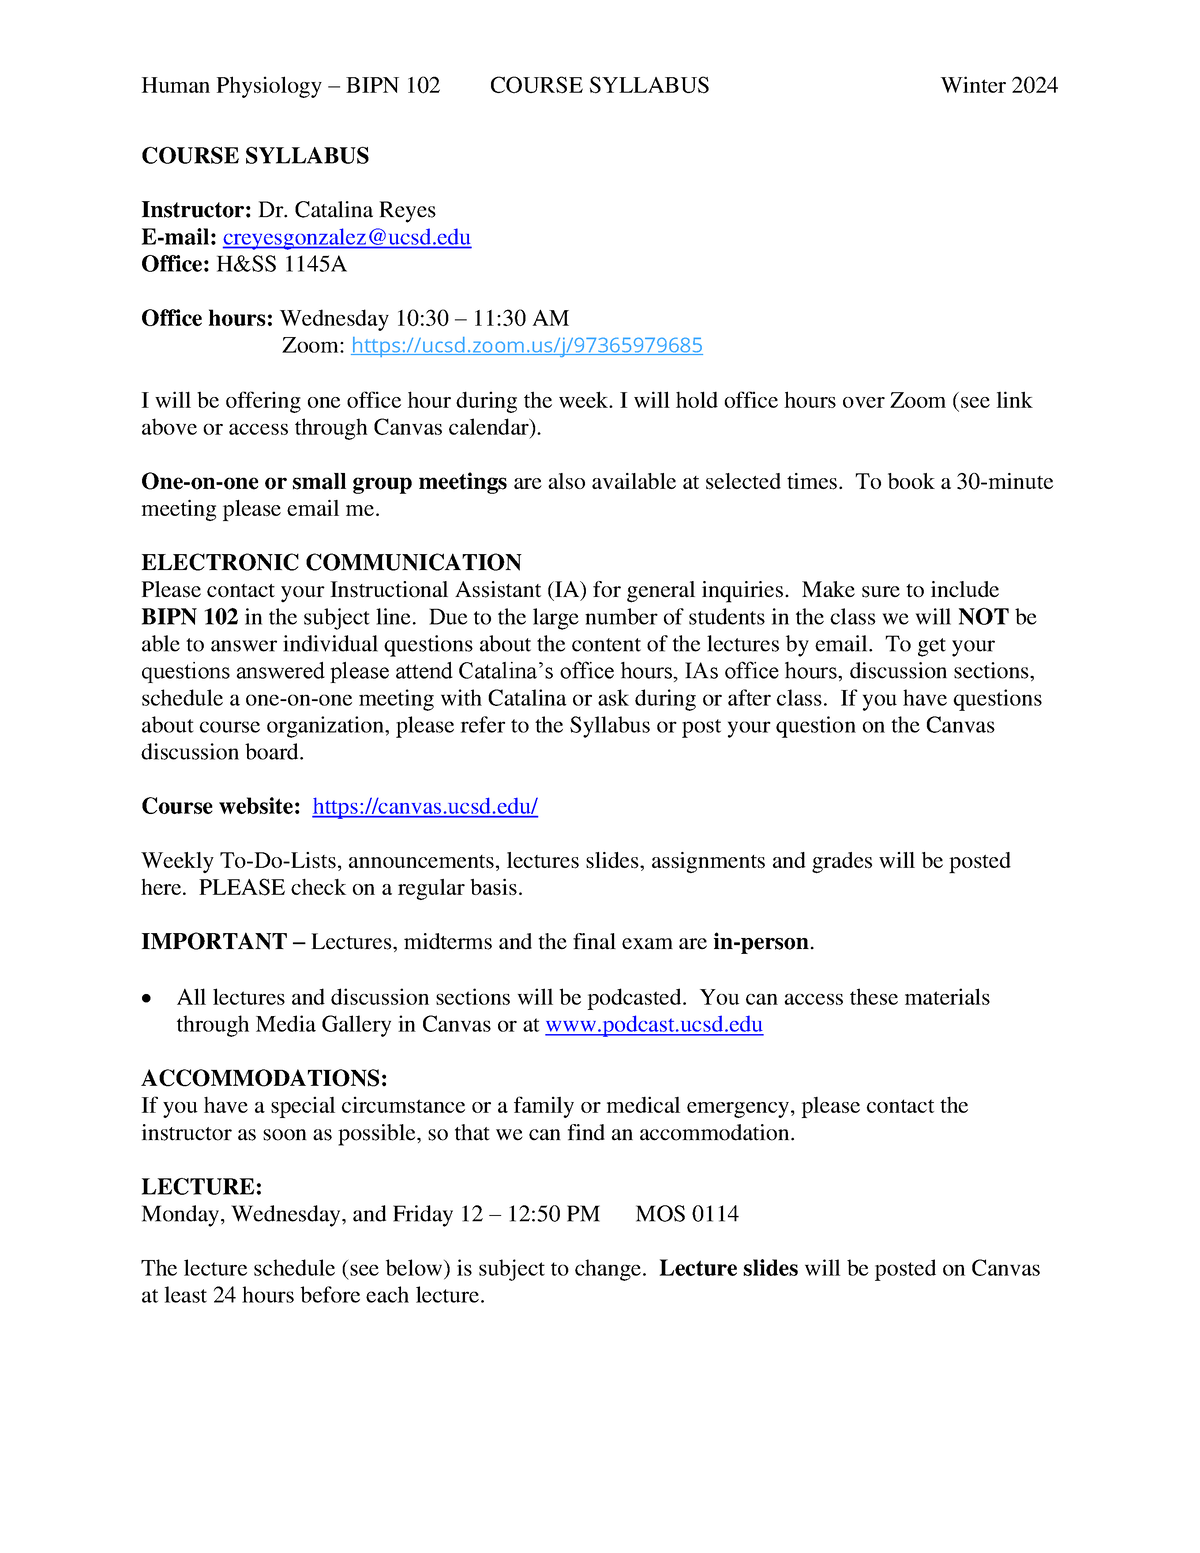 BIPN 102 Winter 2024 Syllabus and Schedule - COURSE SYLLABUS Instructor ...